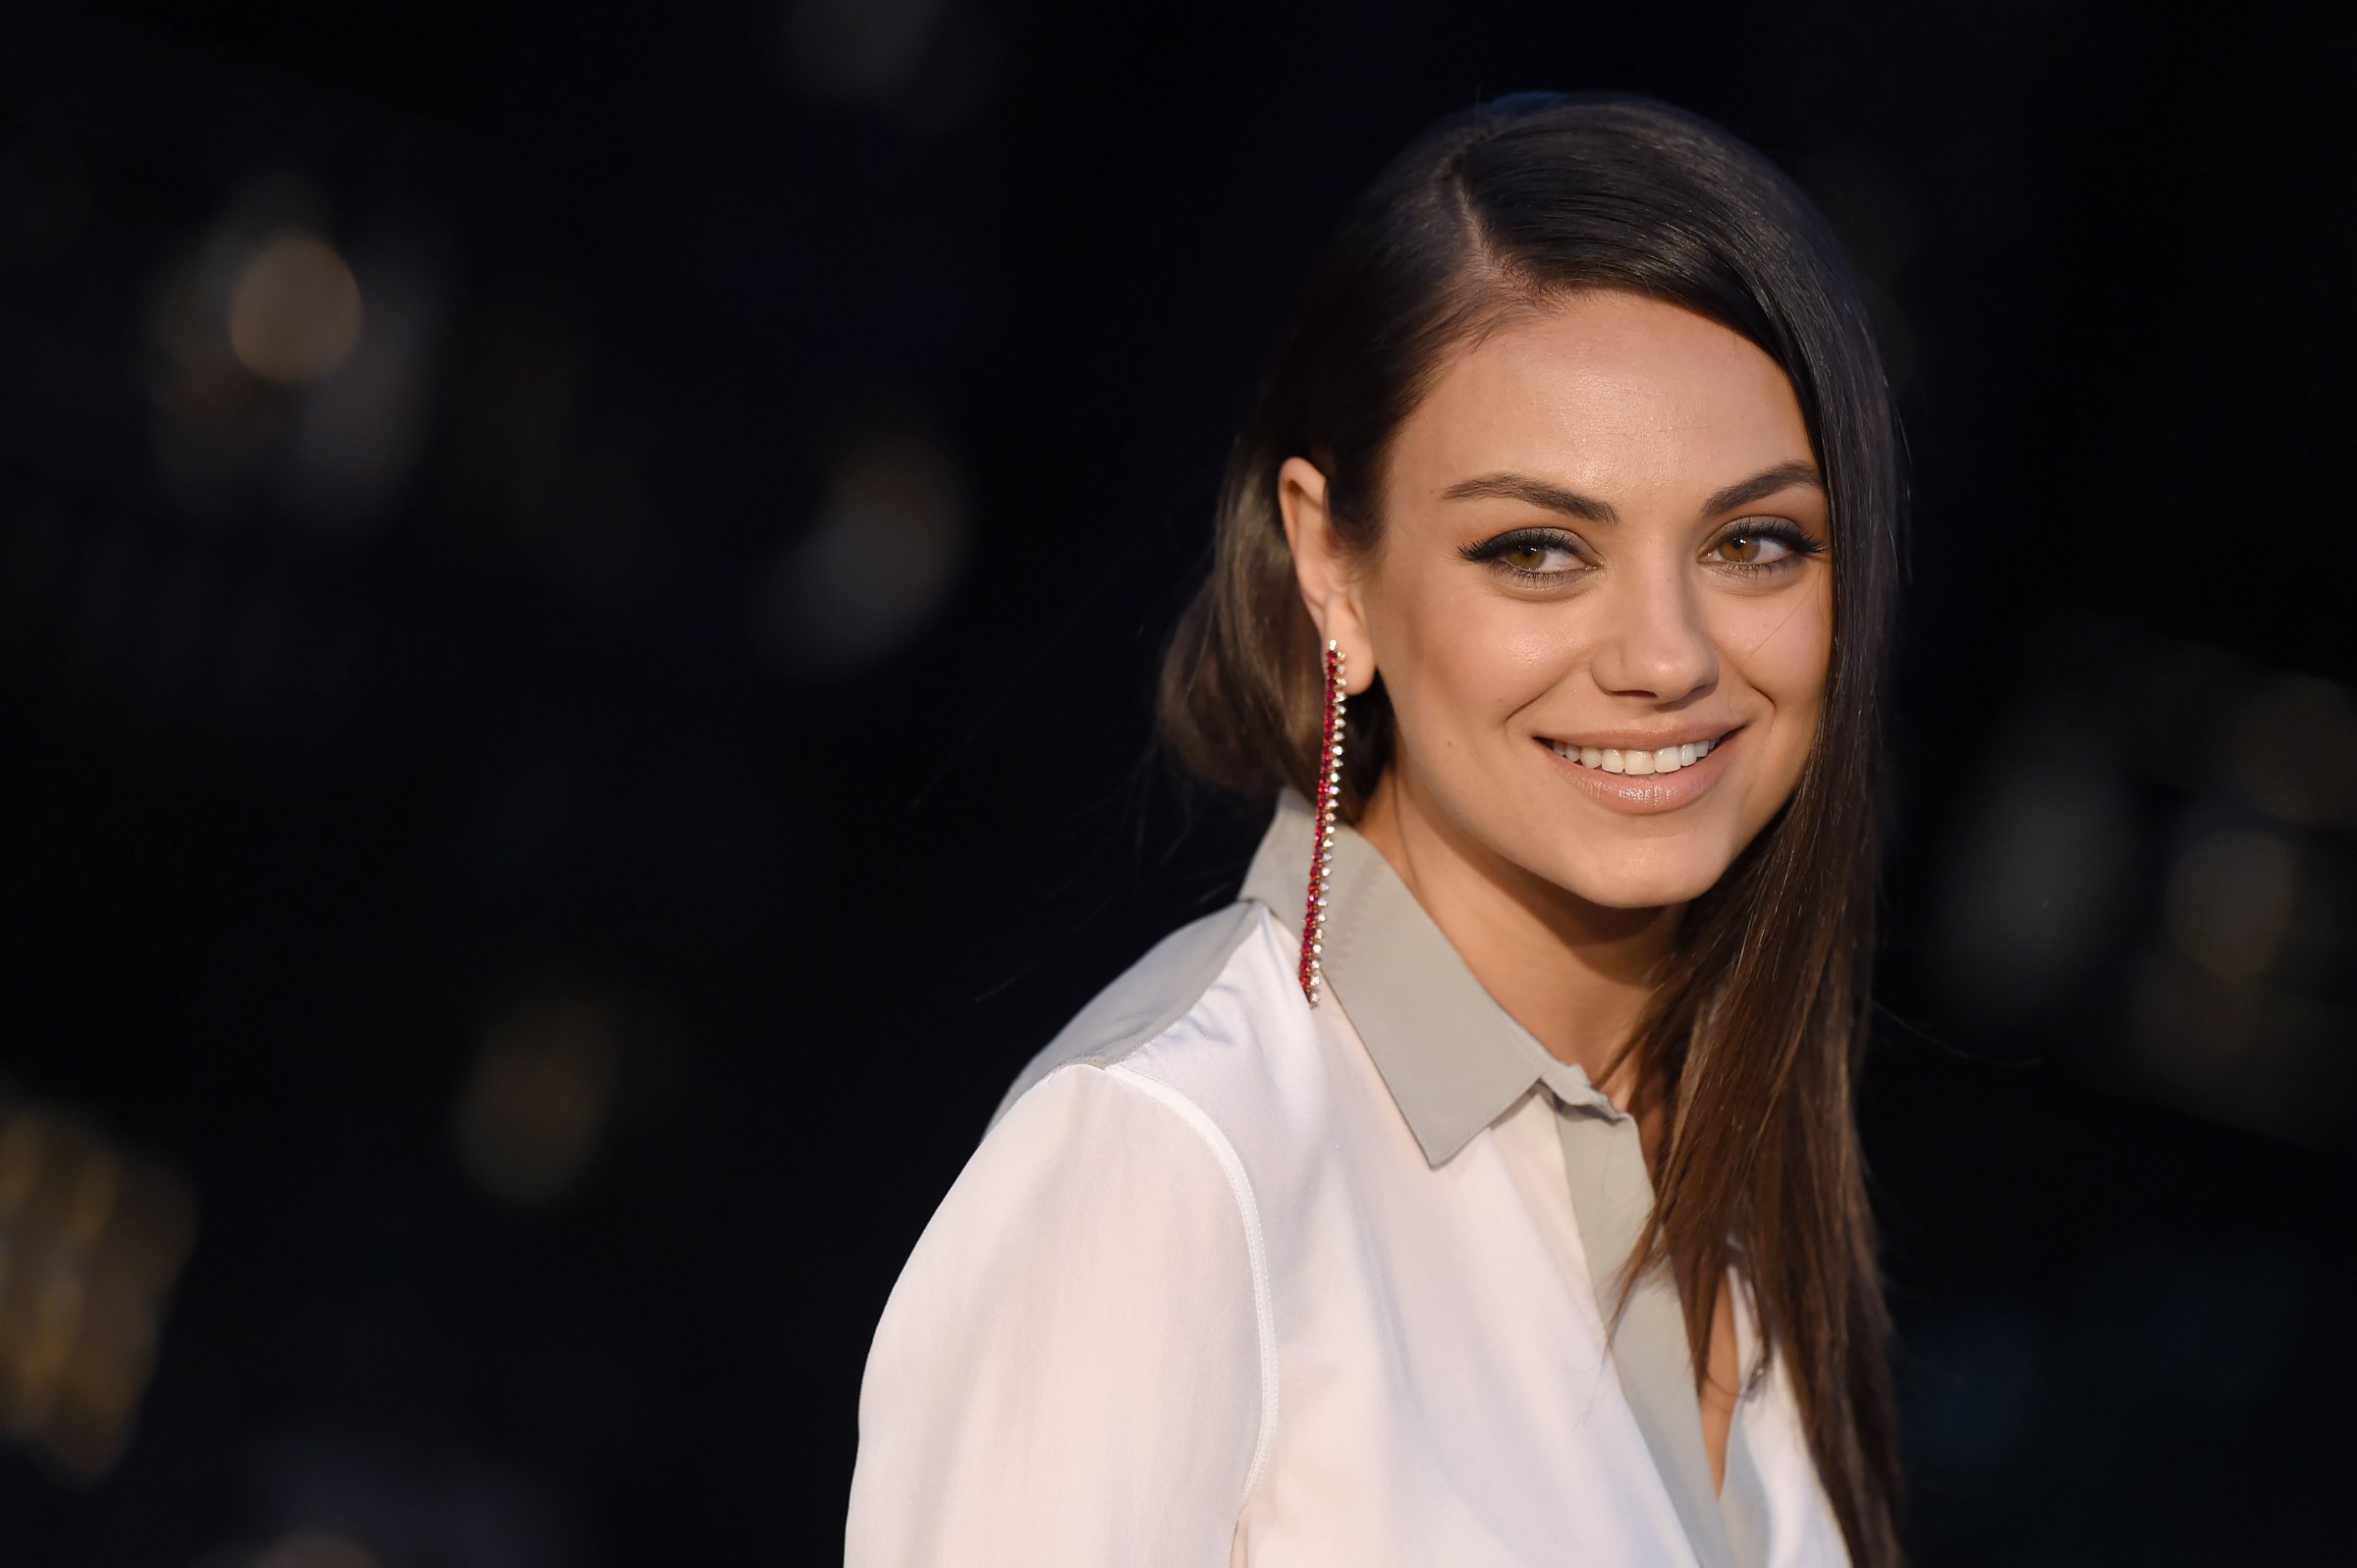 Actress Mila Kunis attends the Burberry 'London in Los Angeles' event at Griffith Observatory on April 16, 2015 in Los Angeles, California.